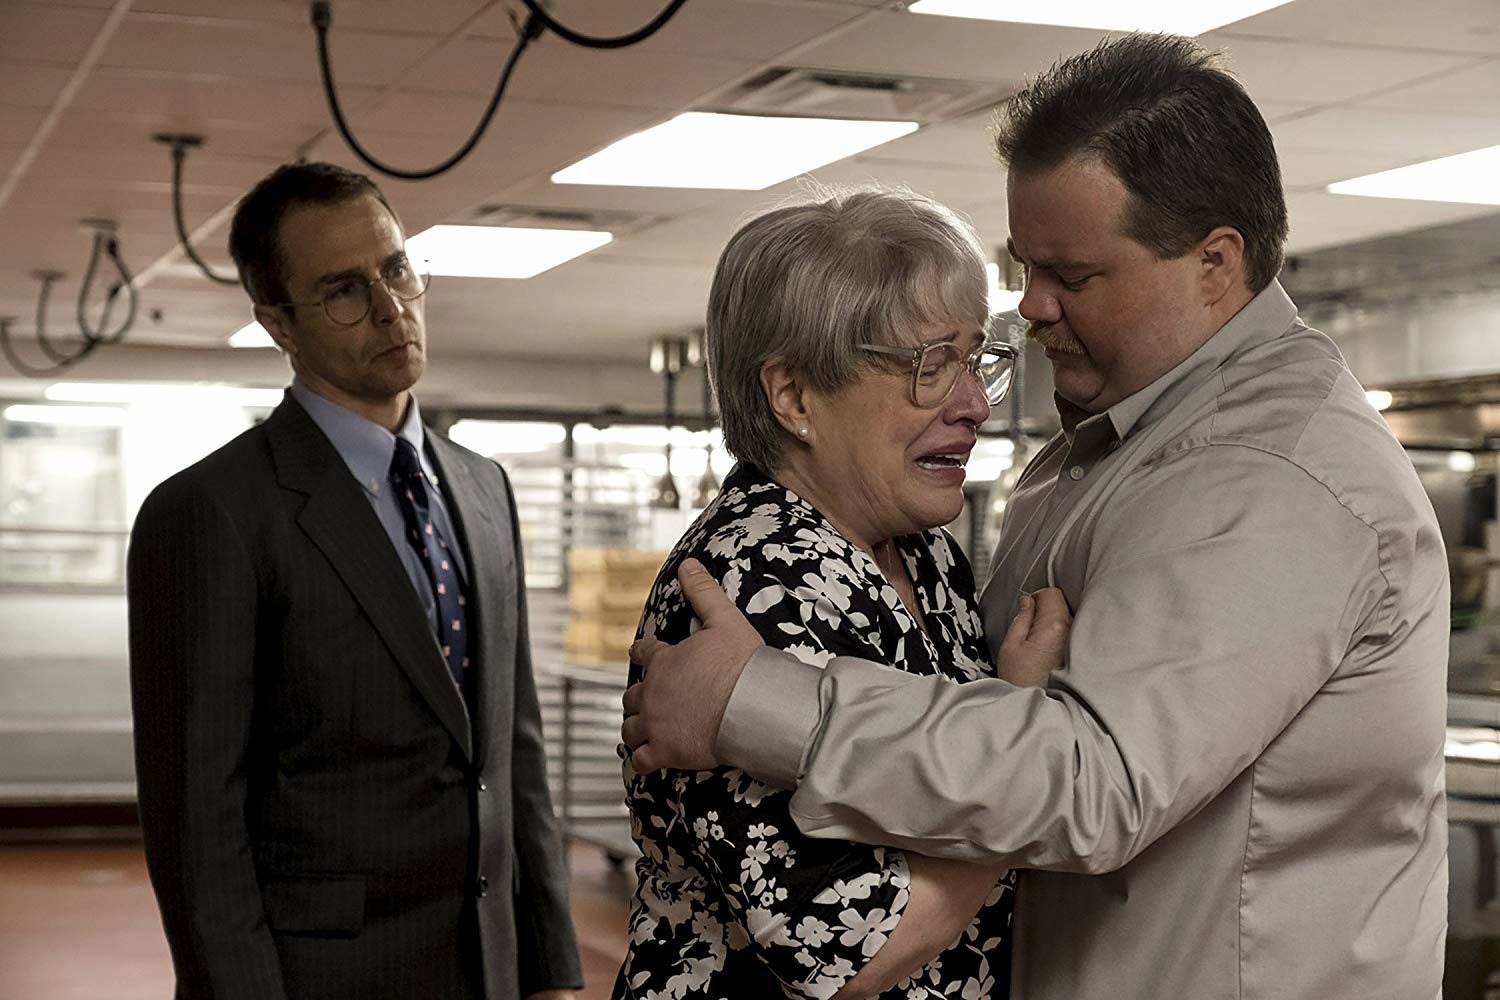 Sam Rockwell, Kathy Bates and Paul Walter Hauser star in Clint Eastwood's "Richard Jewell."